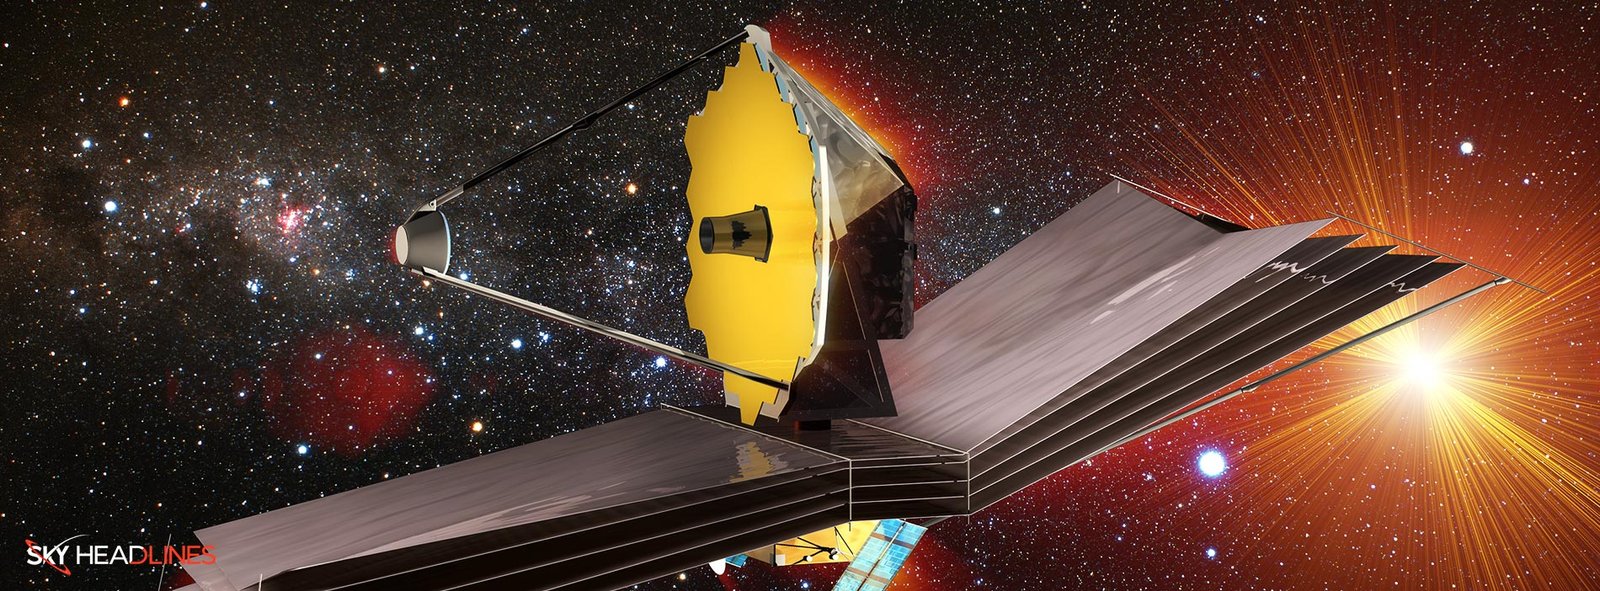 Facts About James Webb Space Telescope!